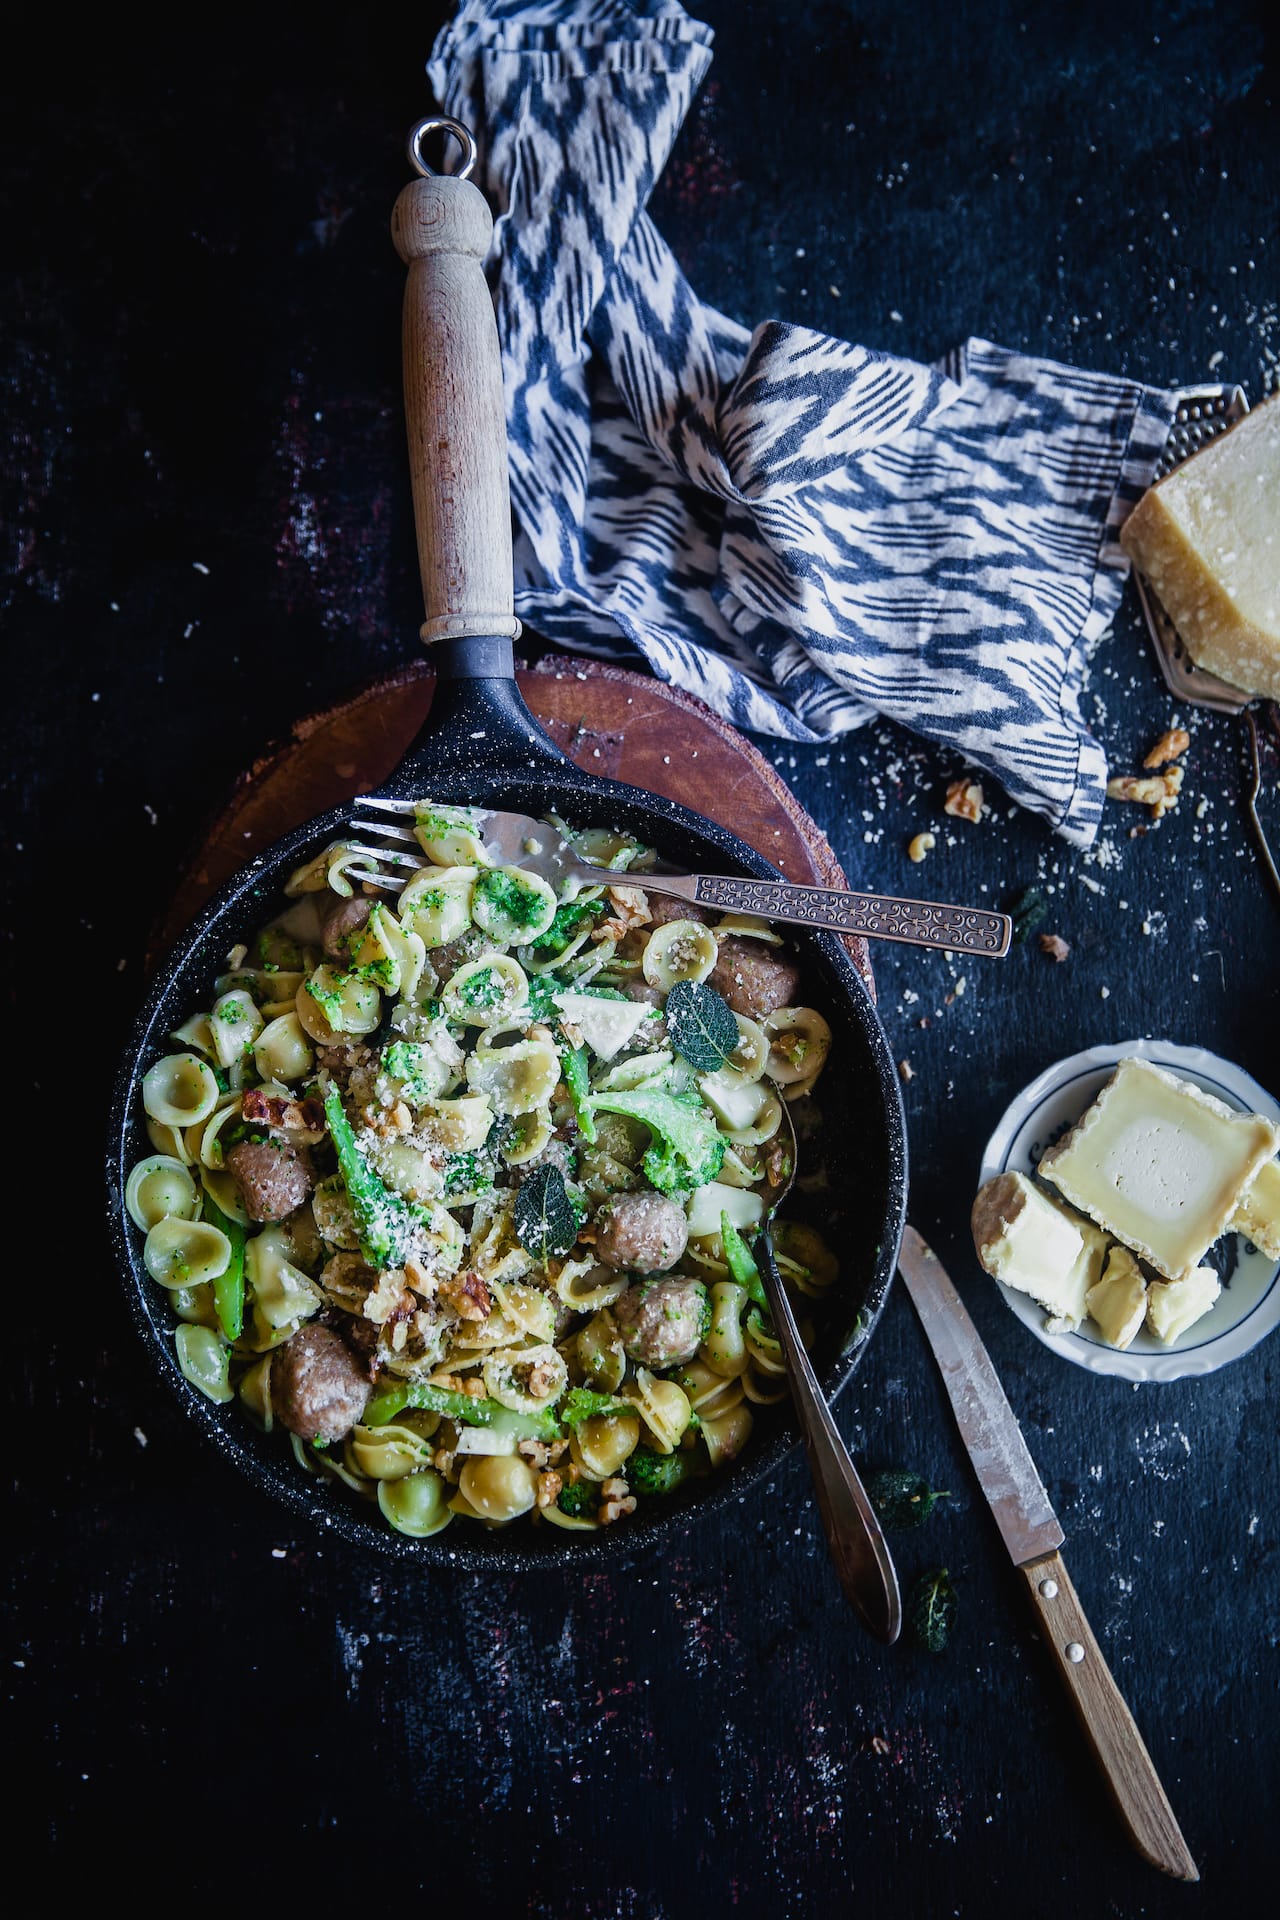 Orecchiette With Sausage, Broccoli And Goat Cheese | Playful Cooking